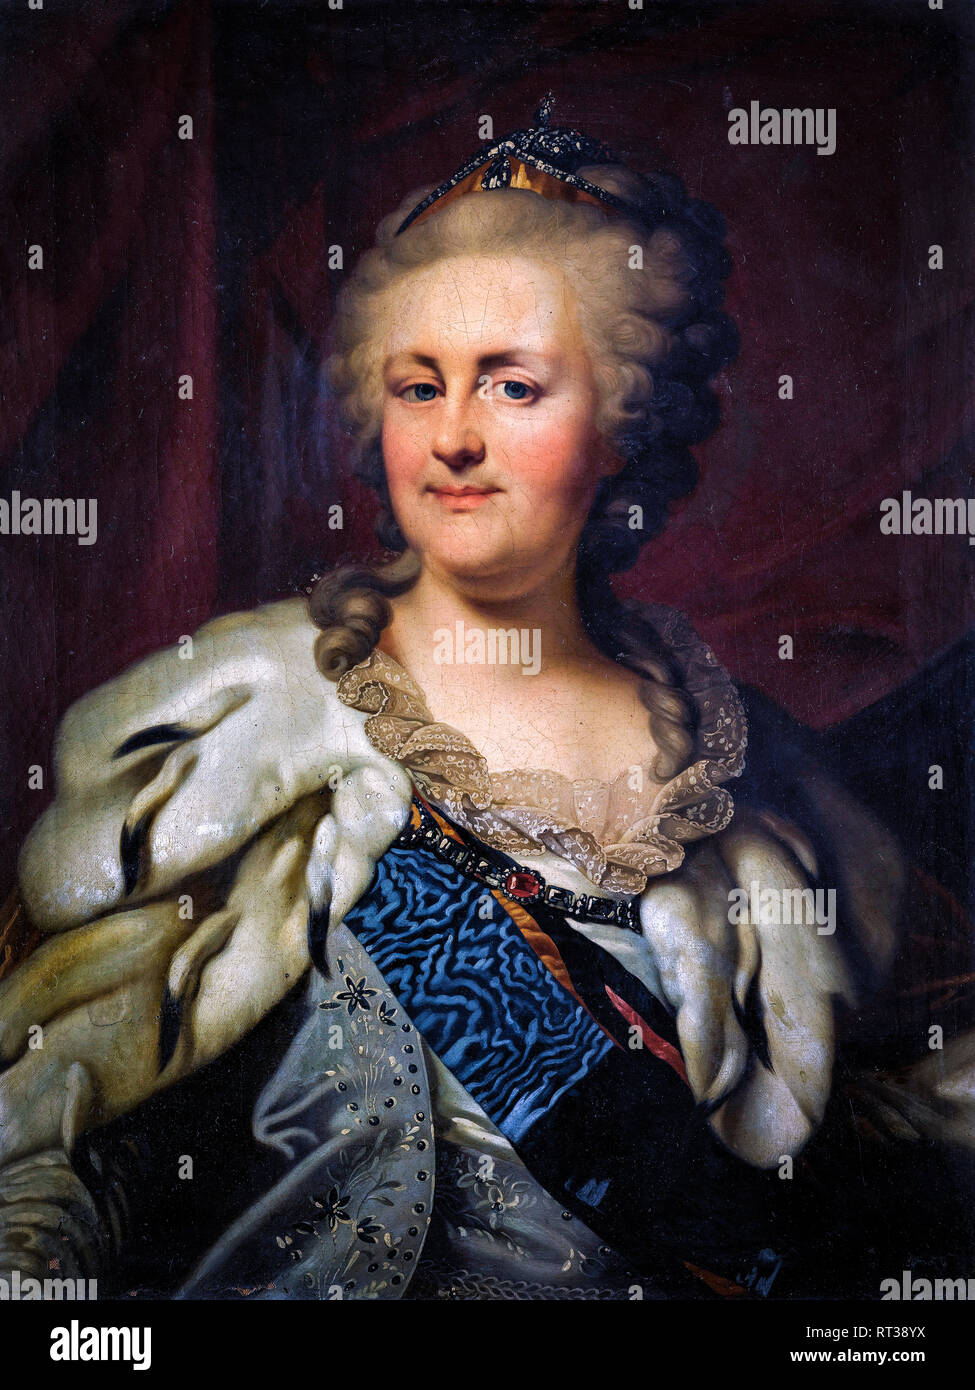 Catherine the Great (1729-1796), portrait painting, 18th Century Stock Photo